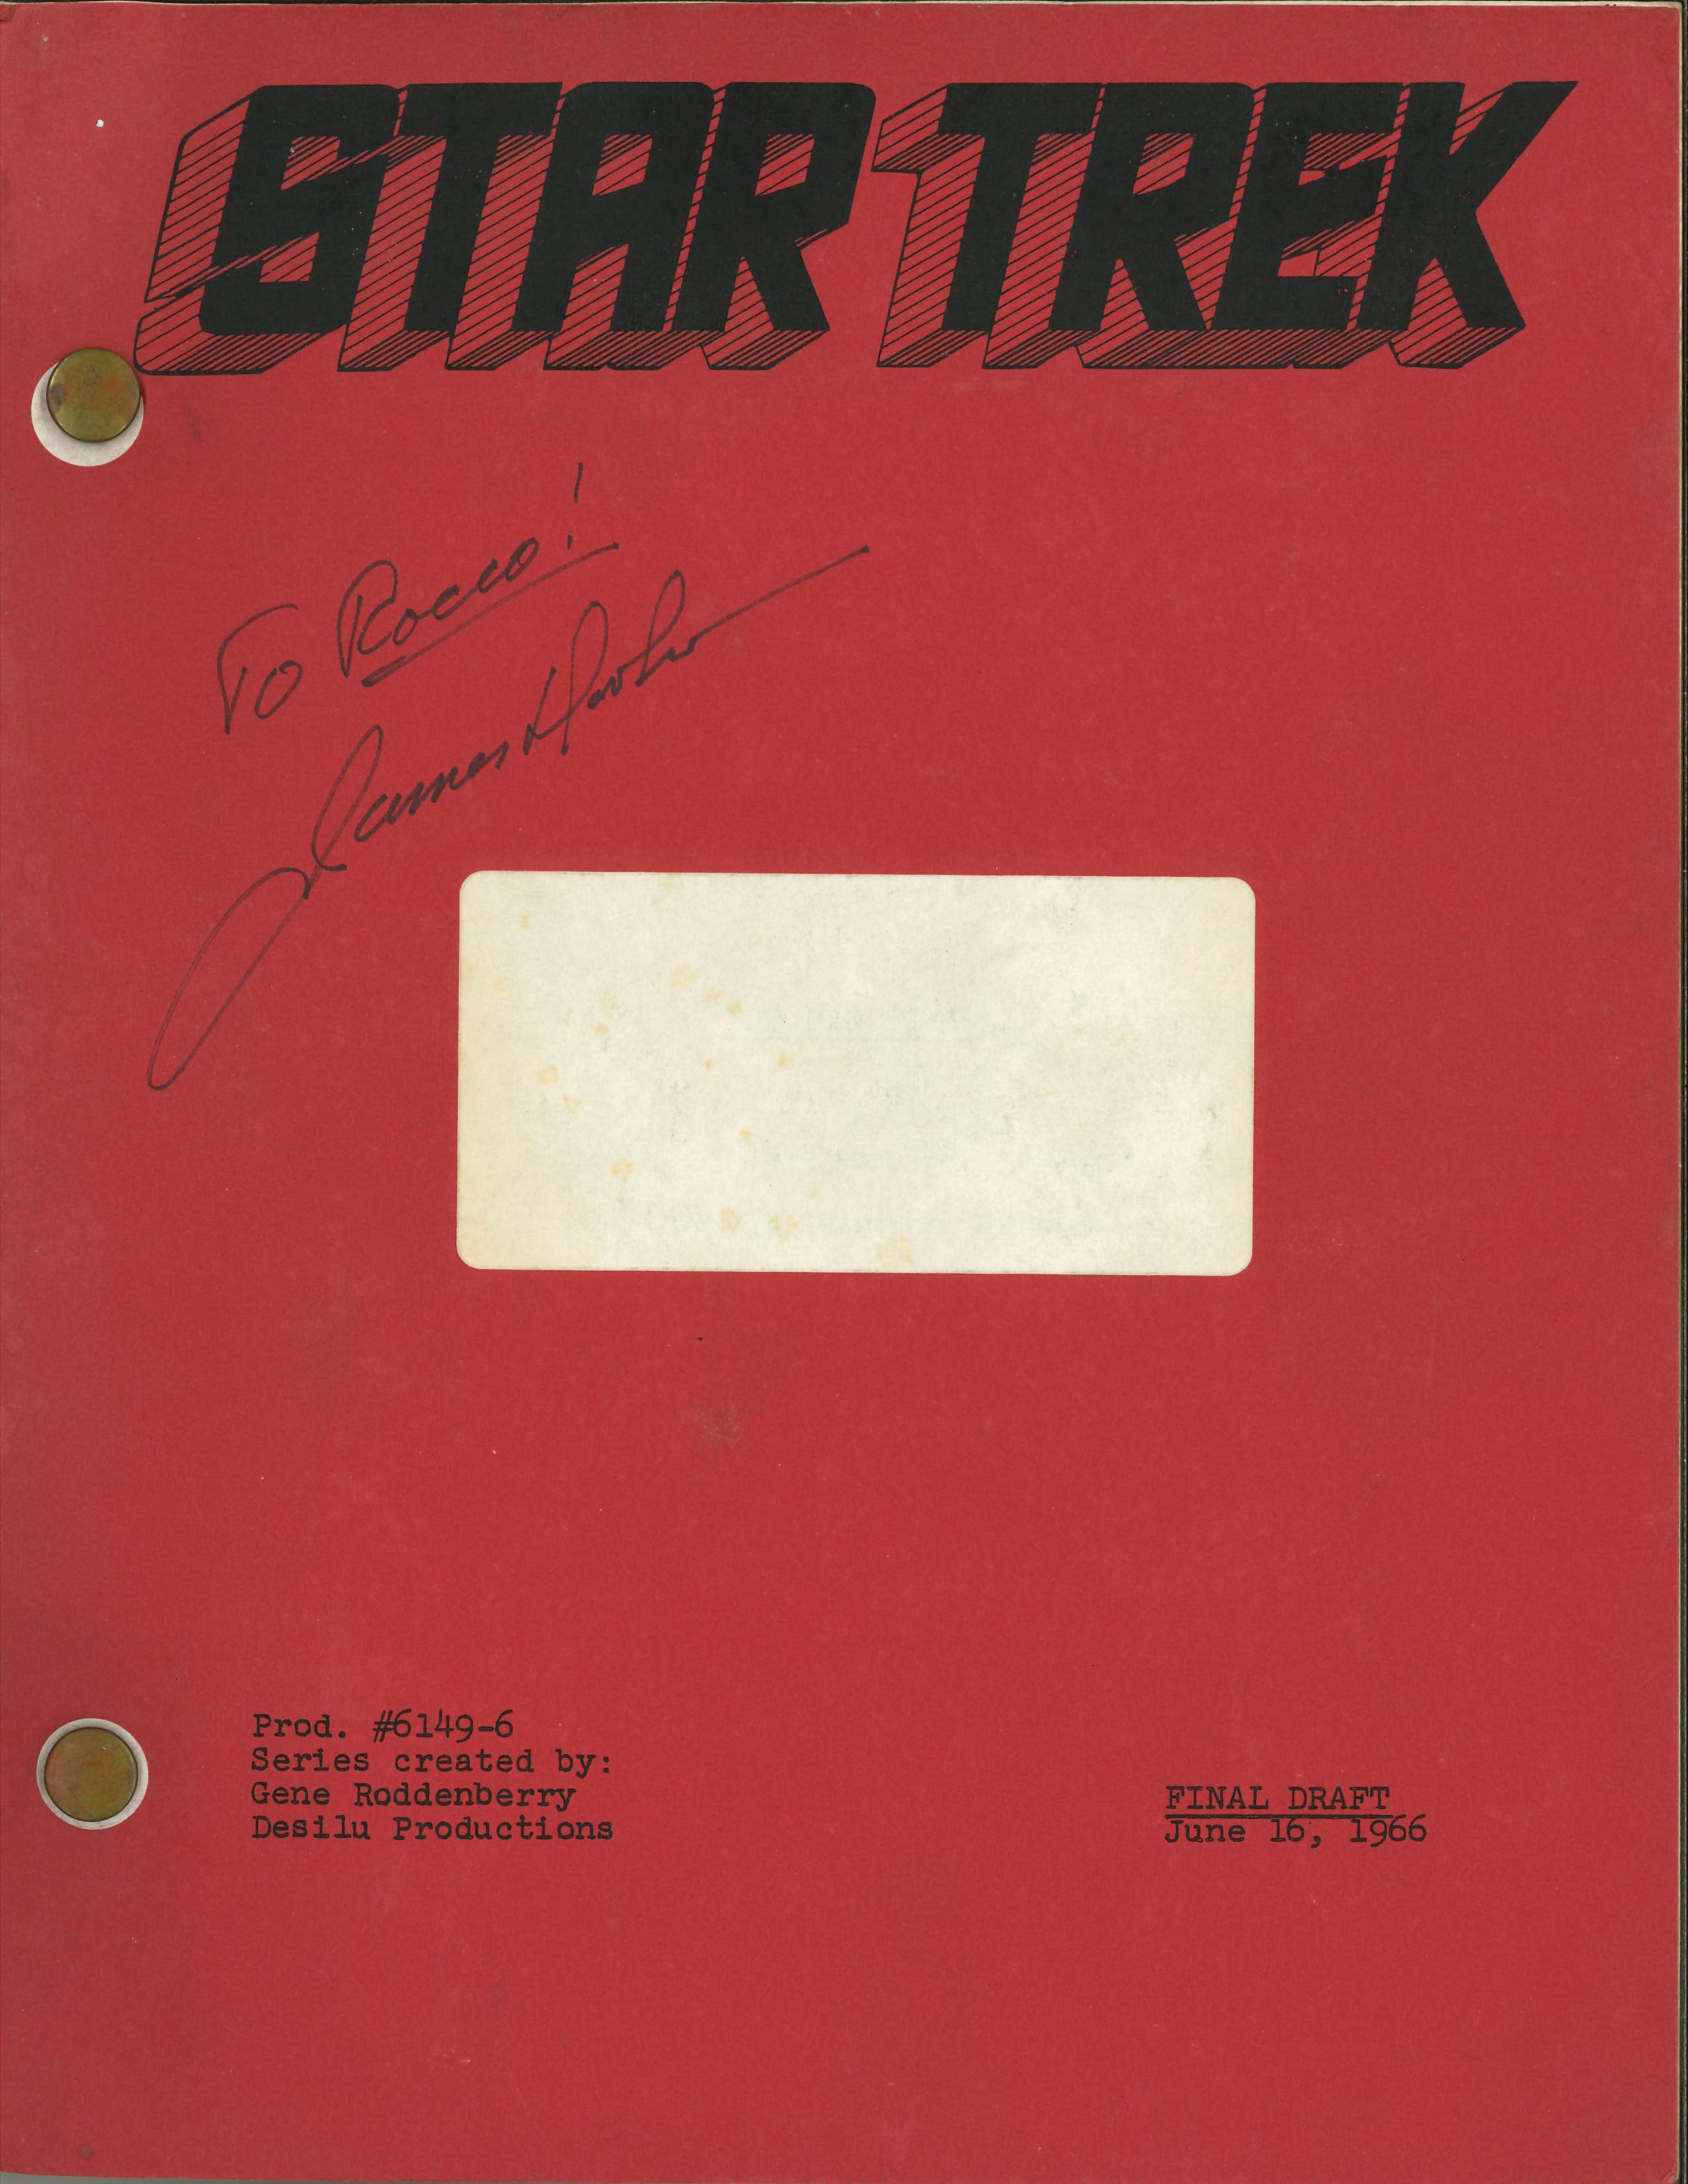 James Doohan's copy of the final script of "Man Trap," the first episode of Star Trek to be broadcast. Doohan played Mister Scott, and that is his signature on this front cover. The show was first aired on 8 September 1966.